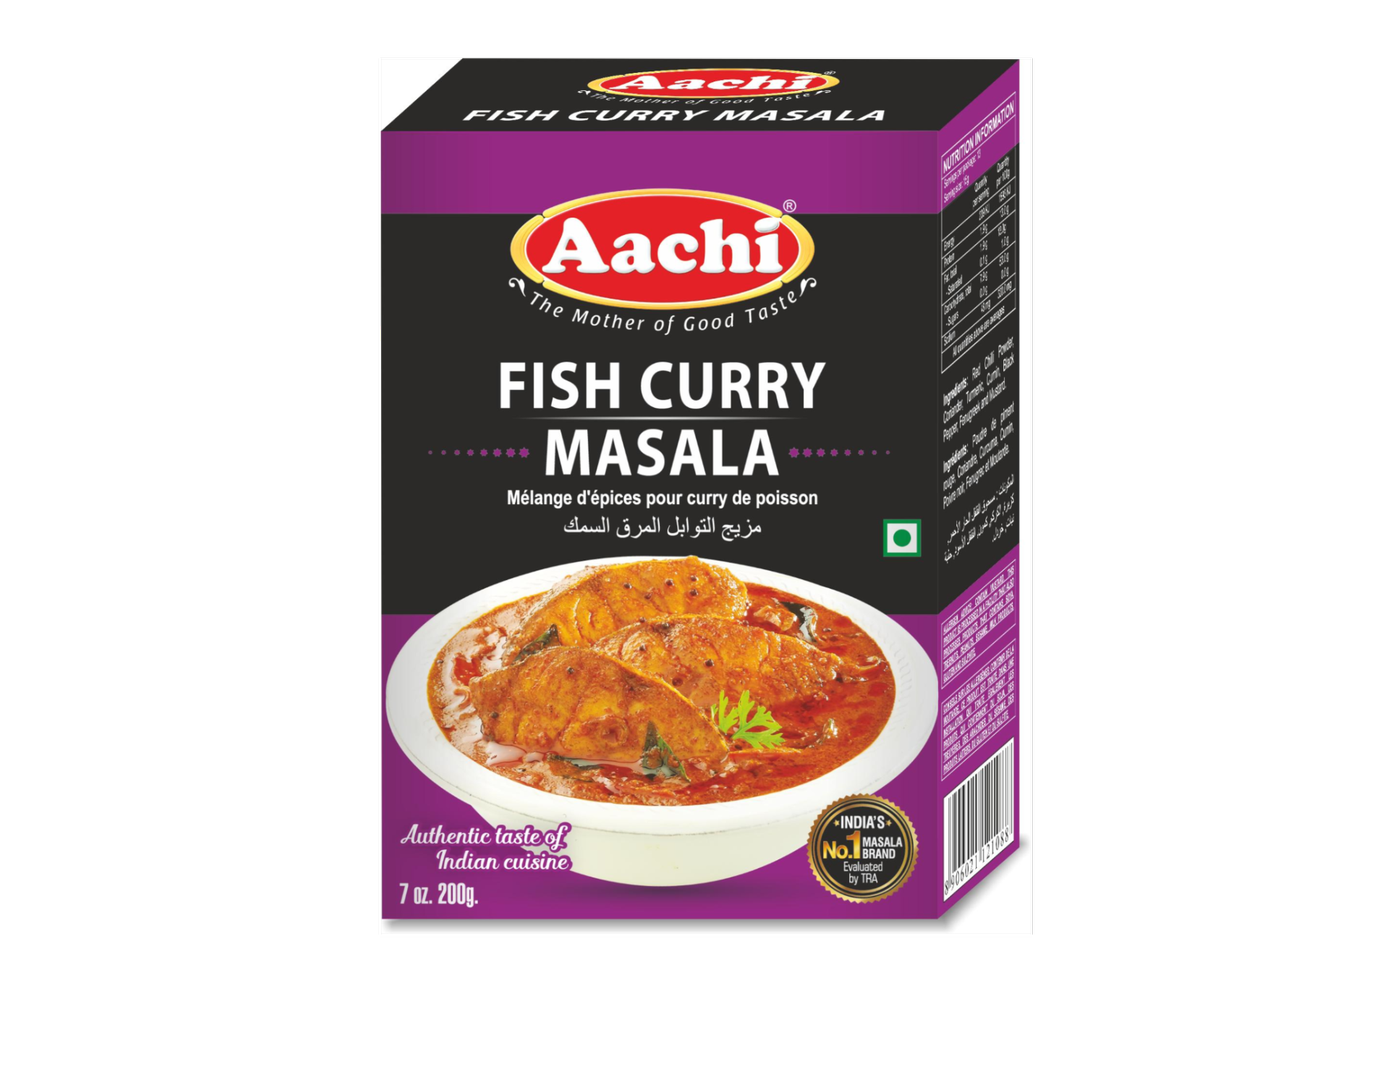 Aachi curry house